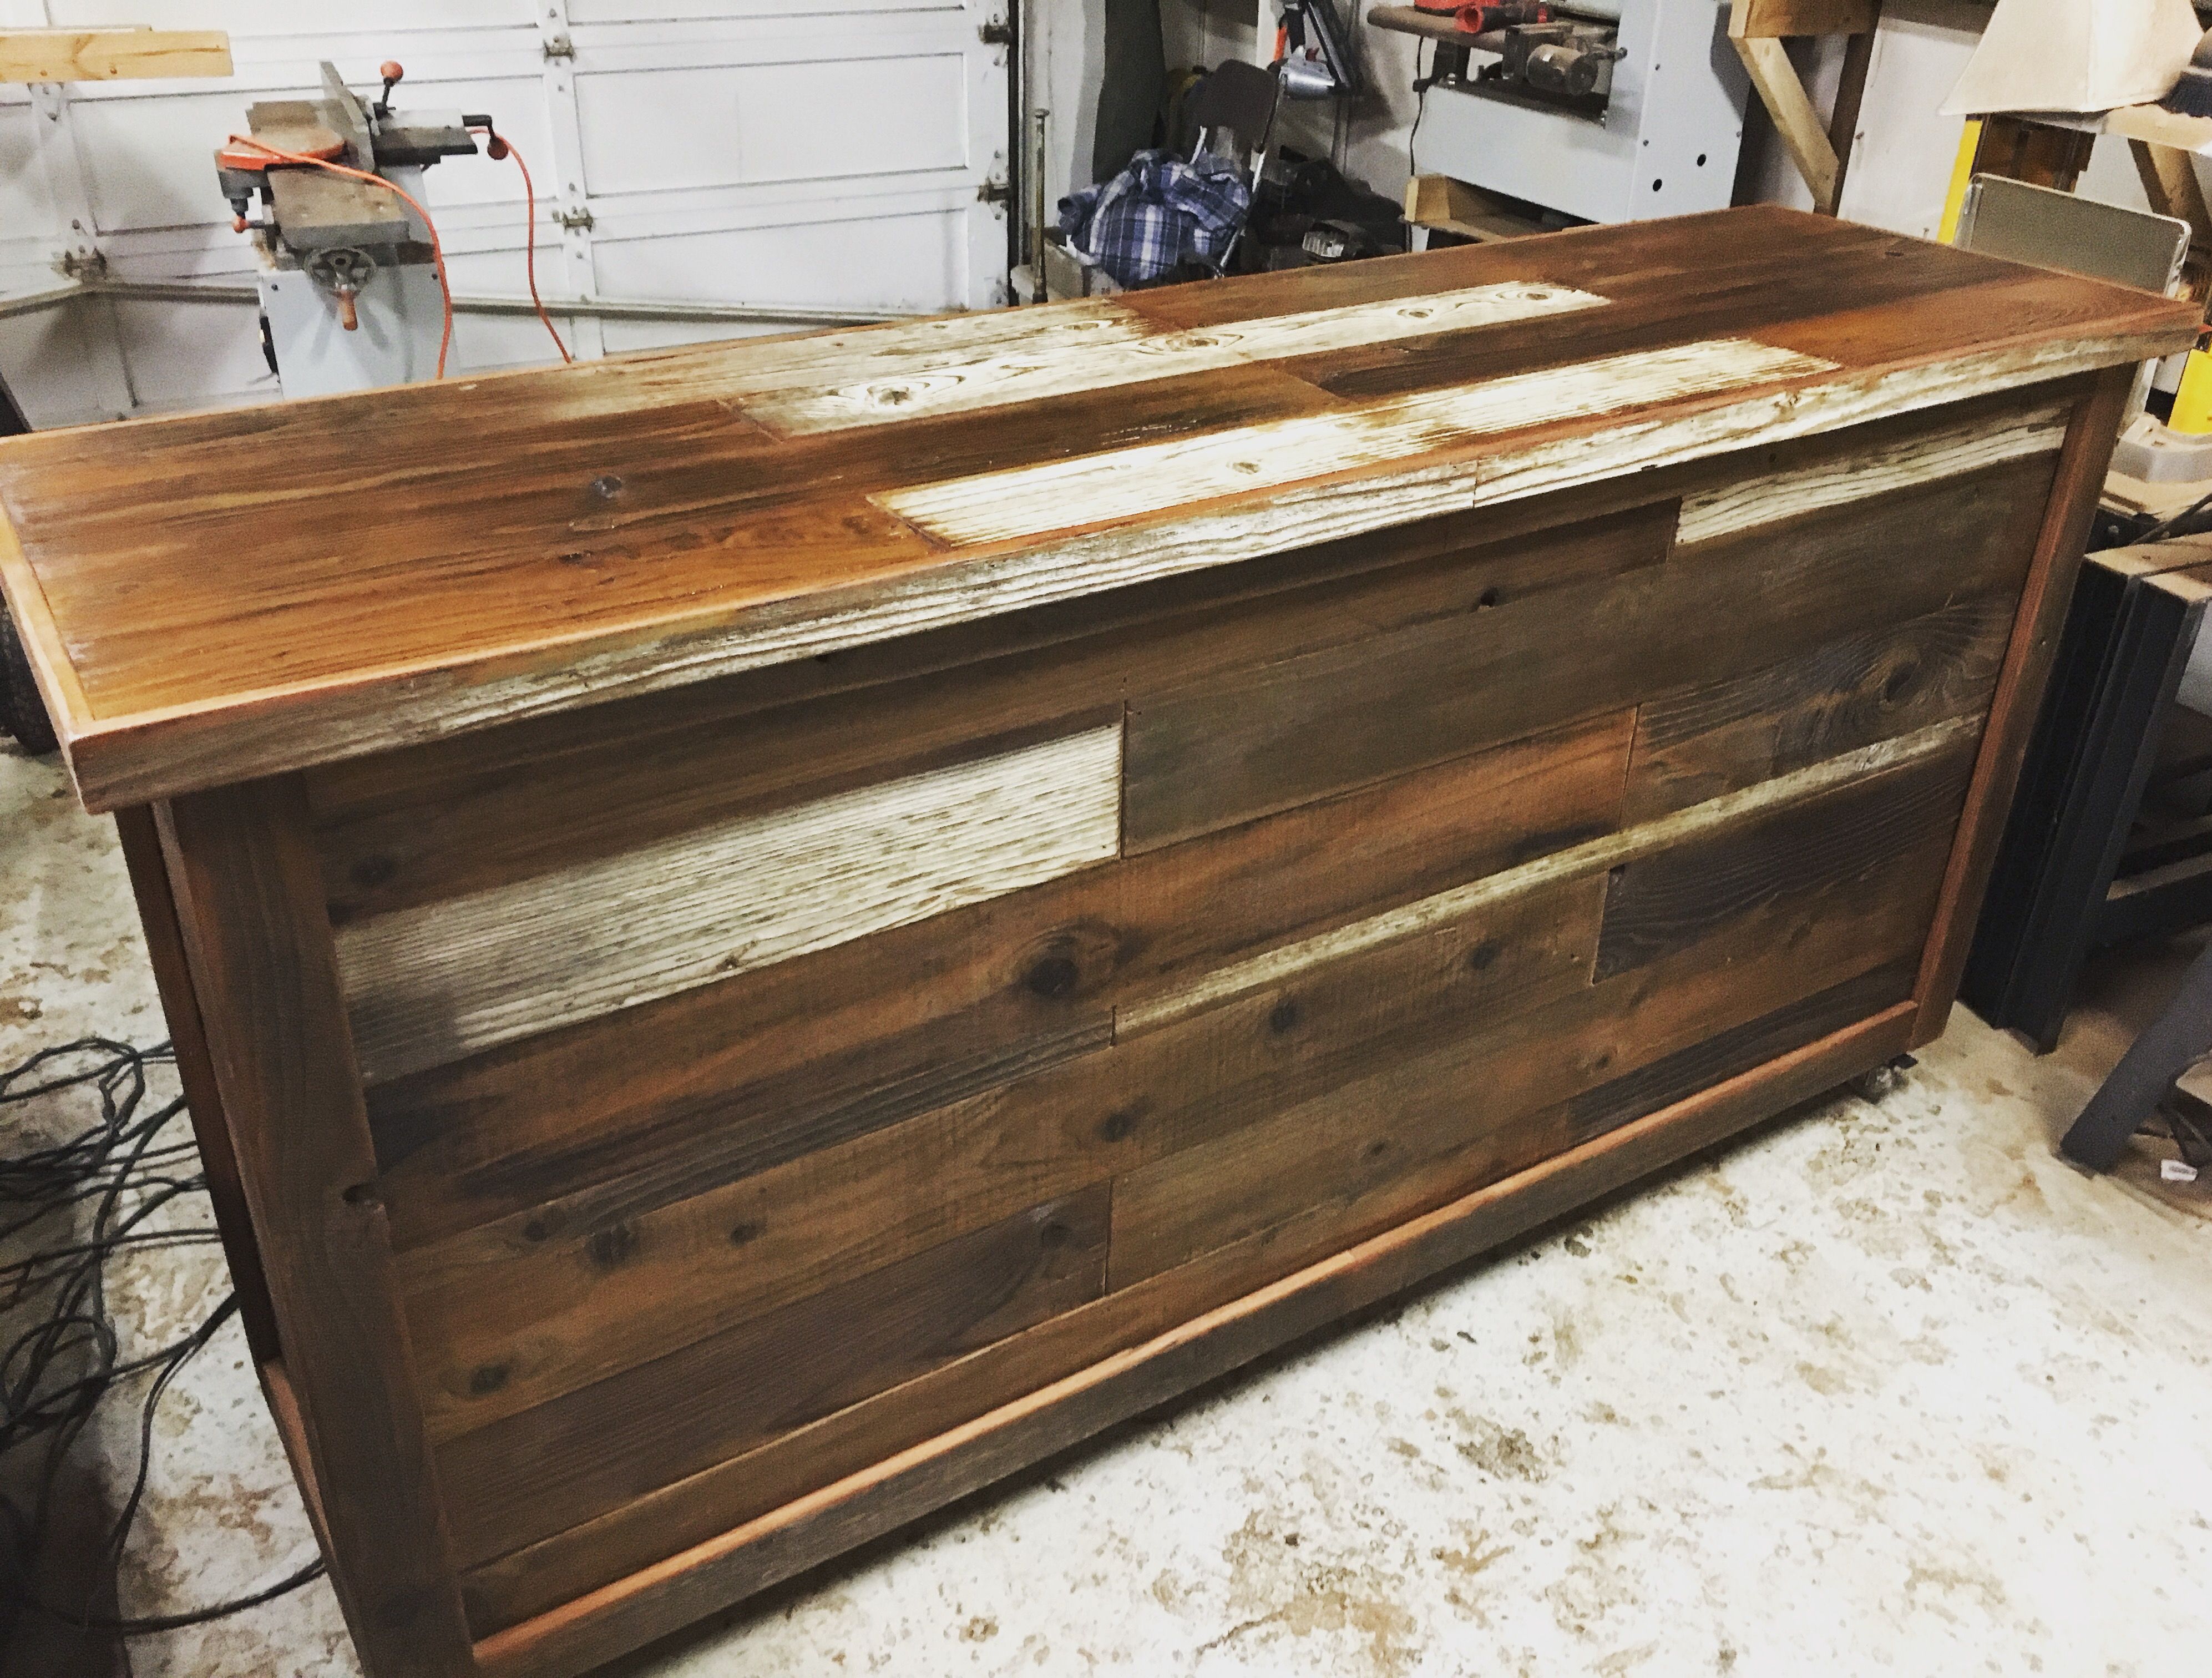 Hand Crafted Reclaimed Wood Front Counter by Urban Mining Company